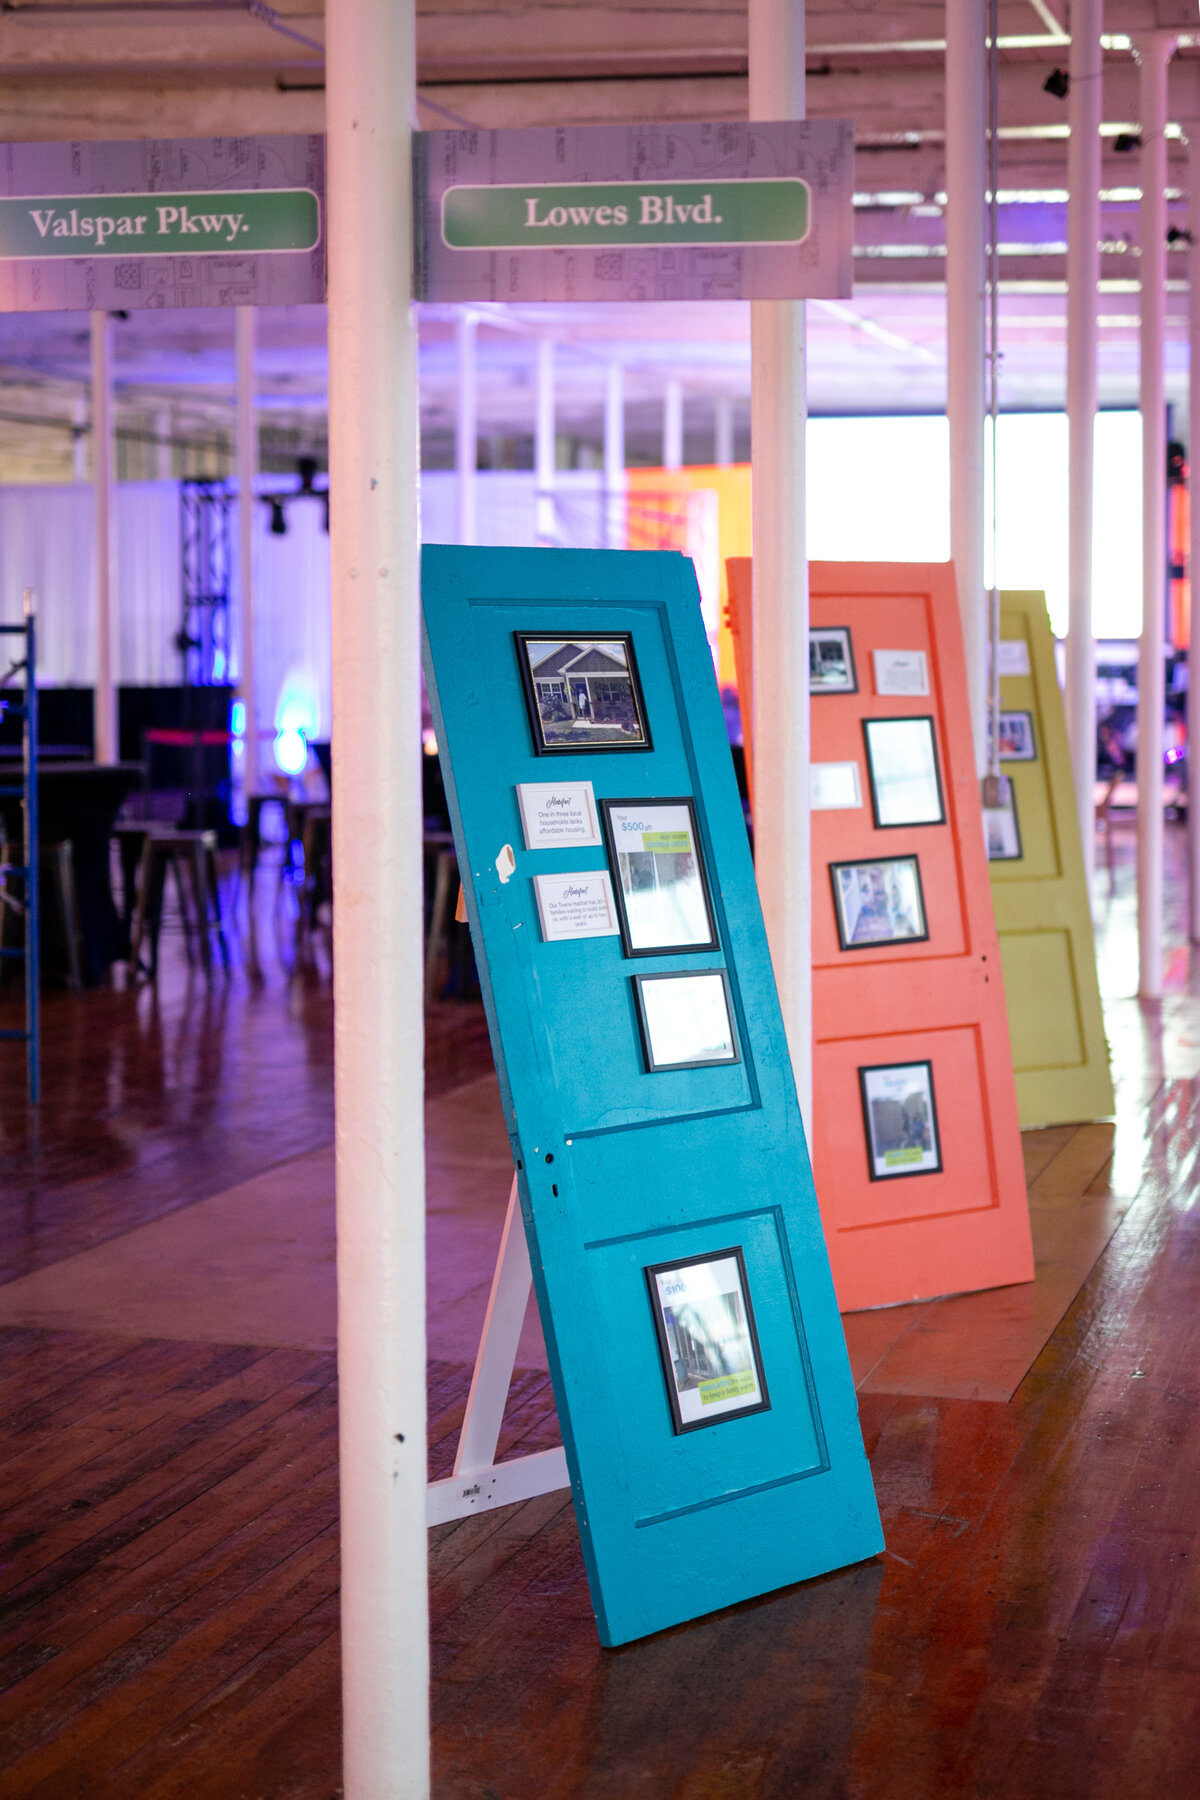 Photos hung on vibrant blue, orange and green doors used as decoration to showcase compelling photography for non-profit event.